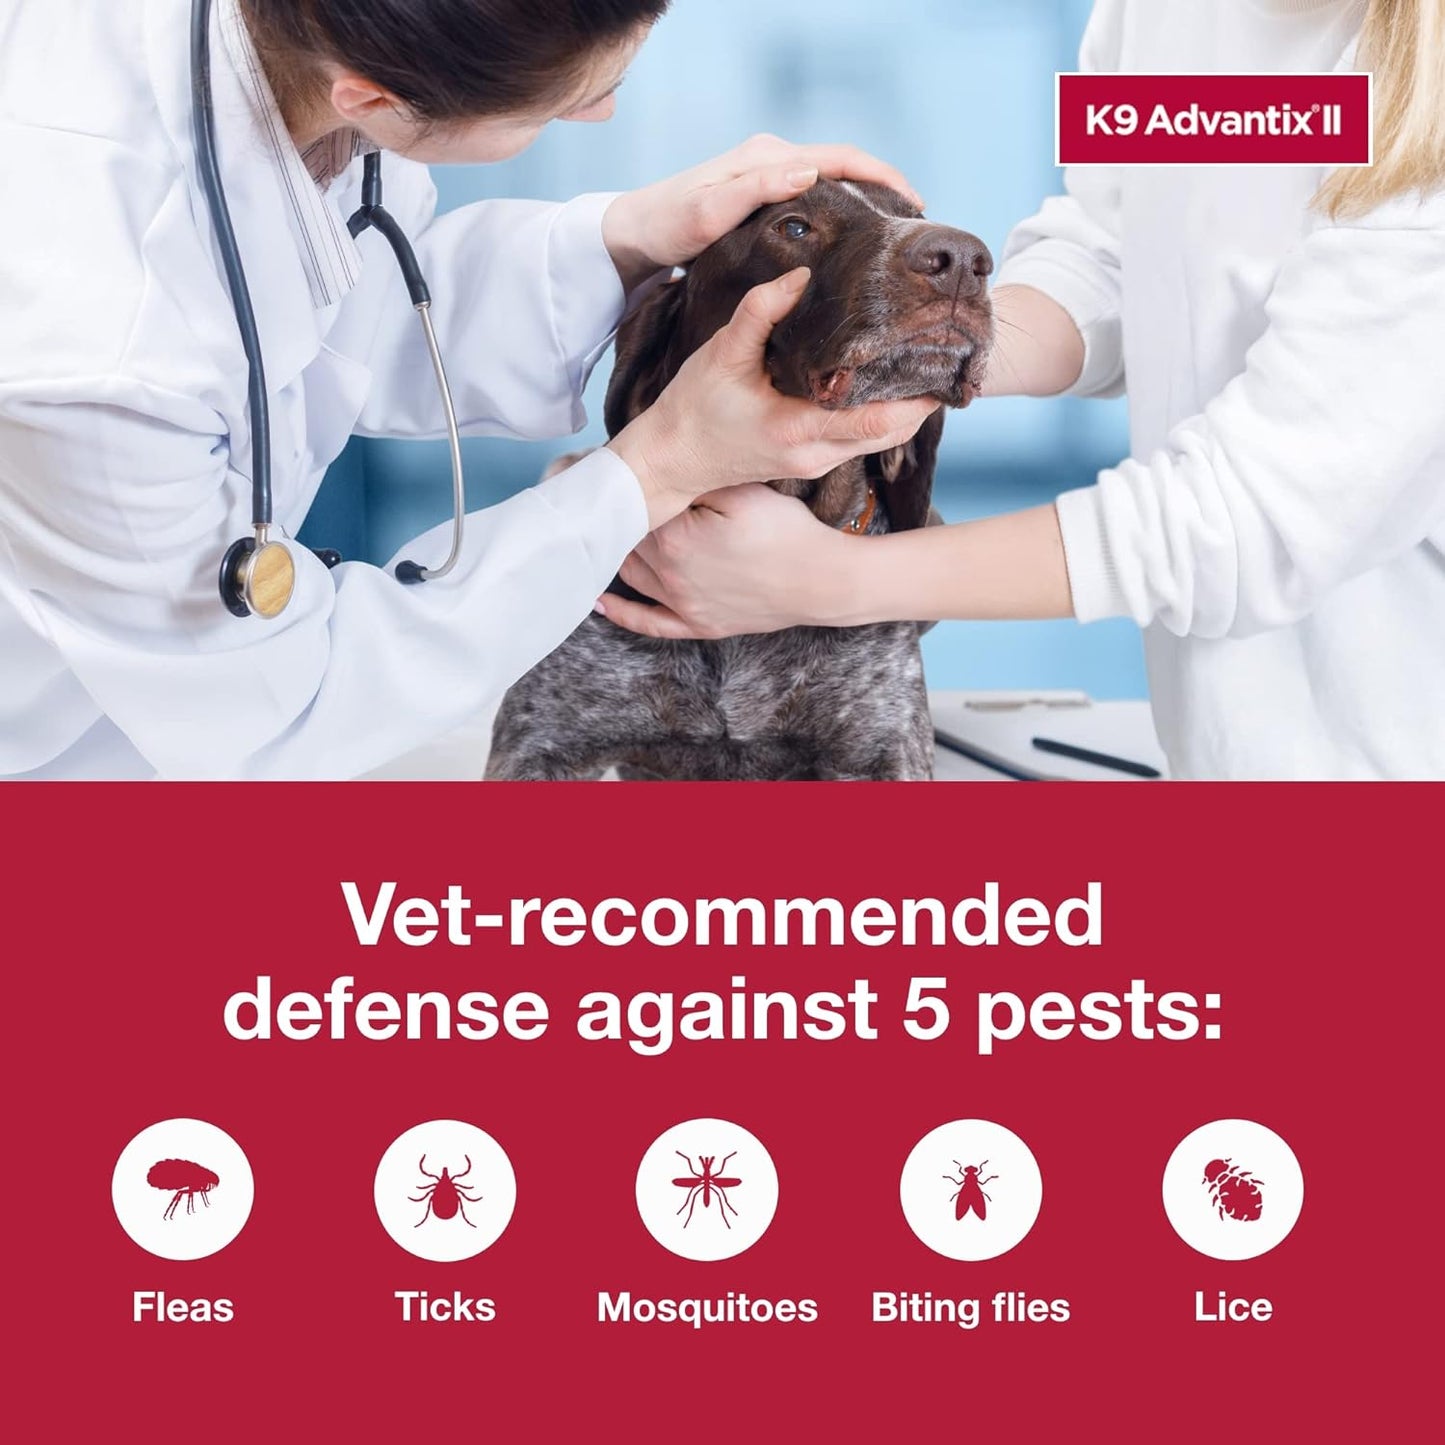 K9 Advantix II Large Dog Vet-Recommended Flea, Tick & Mosquito Treatment & Prevention | Dogs 21 - 55 lbs. | 4-Mo Supply